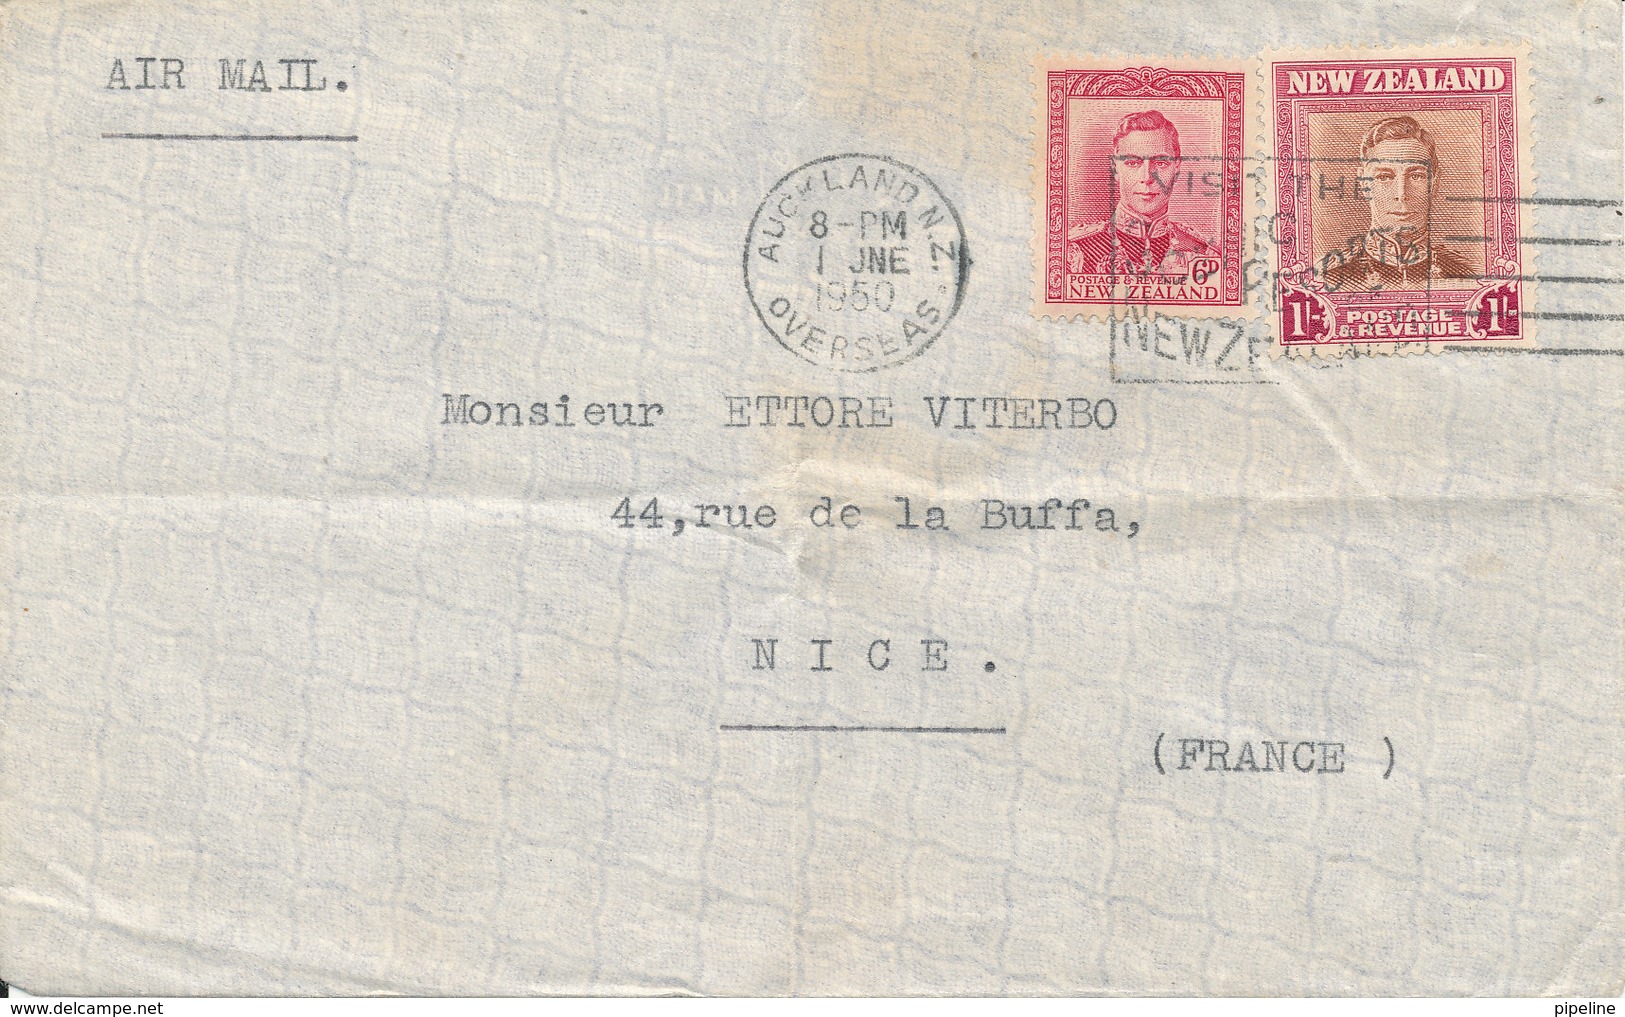 New Zealand Air Mail Cover Sent To France Auckland 1-6-1950 (the Cover Is Bended) - Airmail